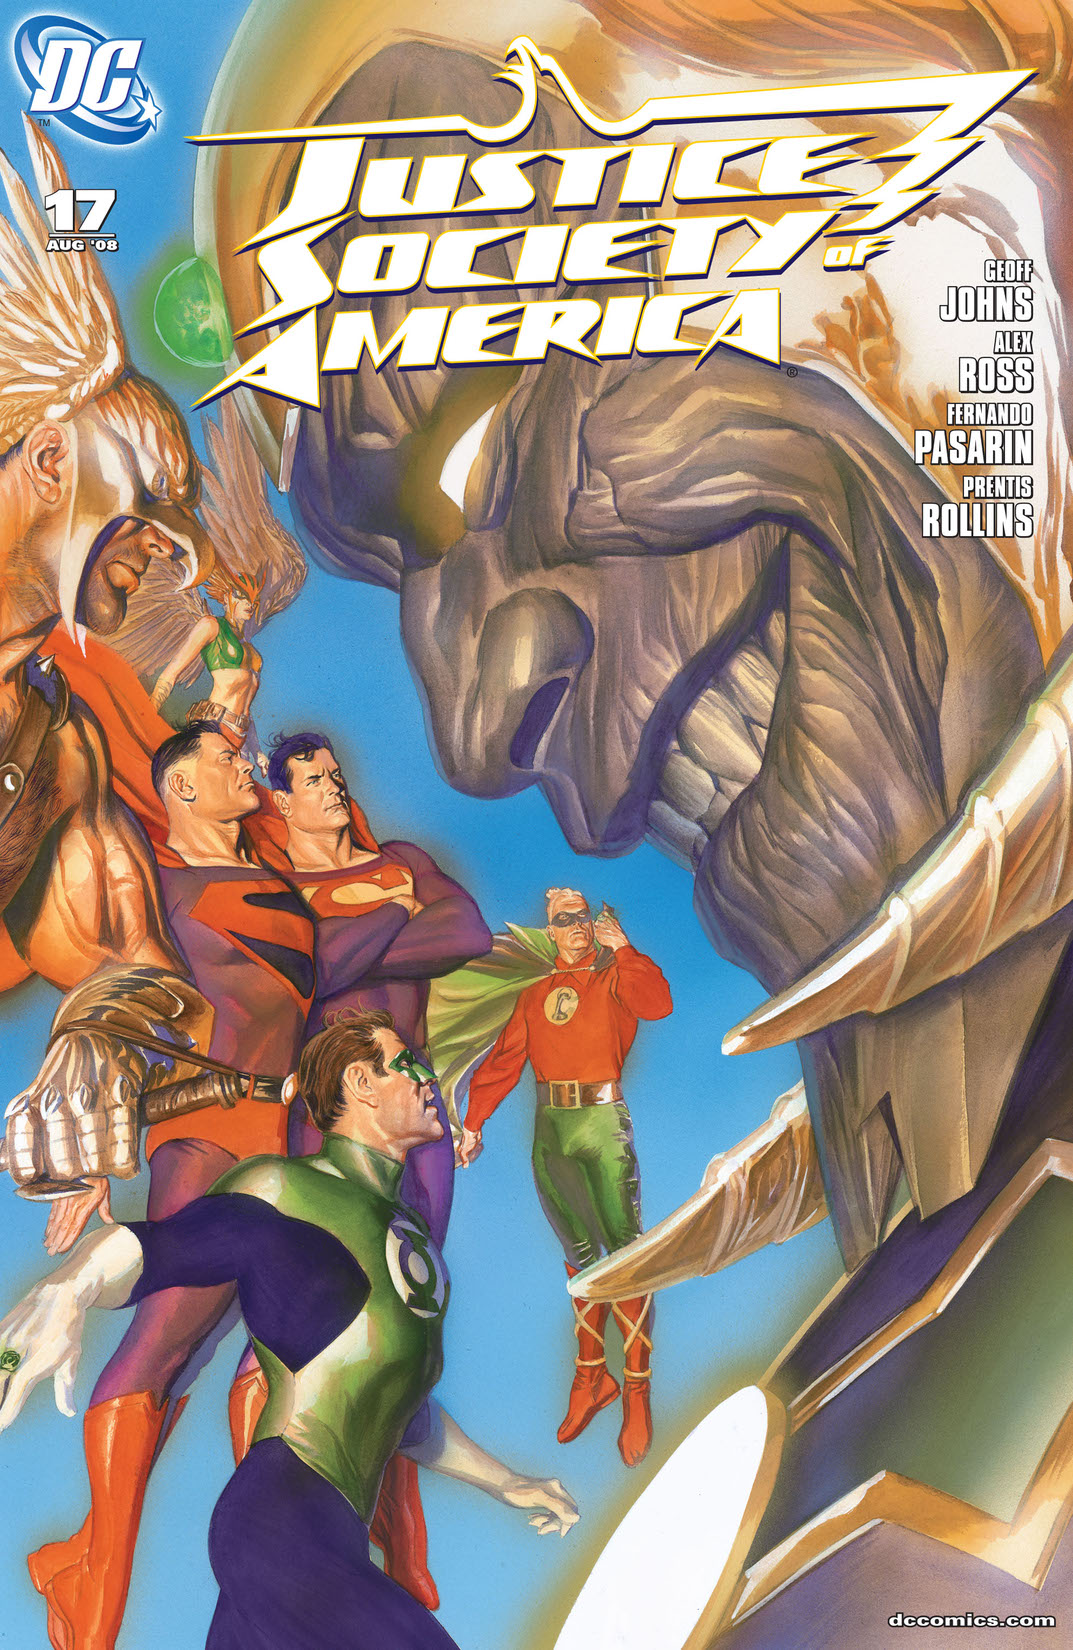 Justice Society of America (2006-) #17 preview images